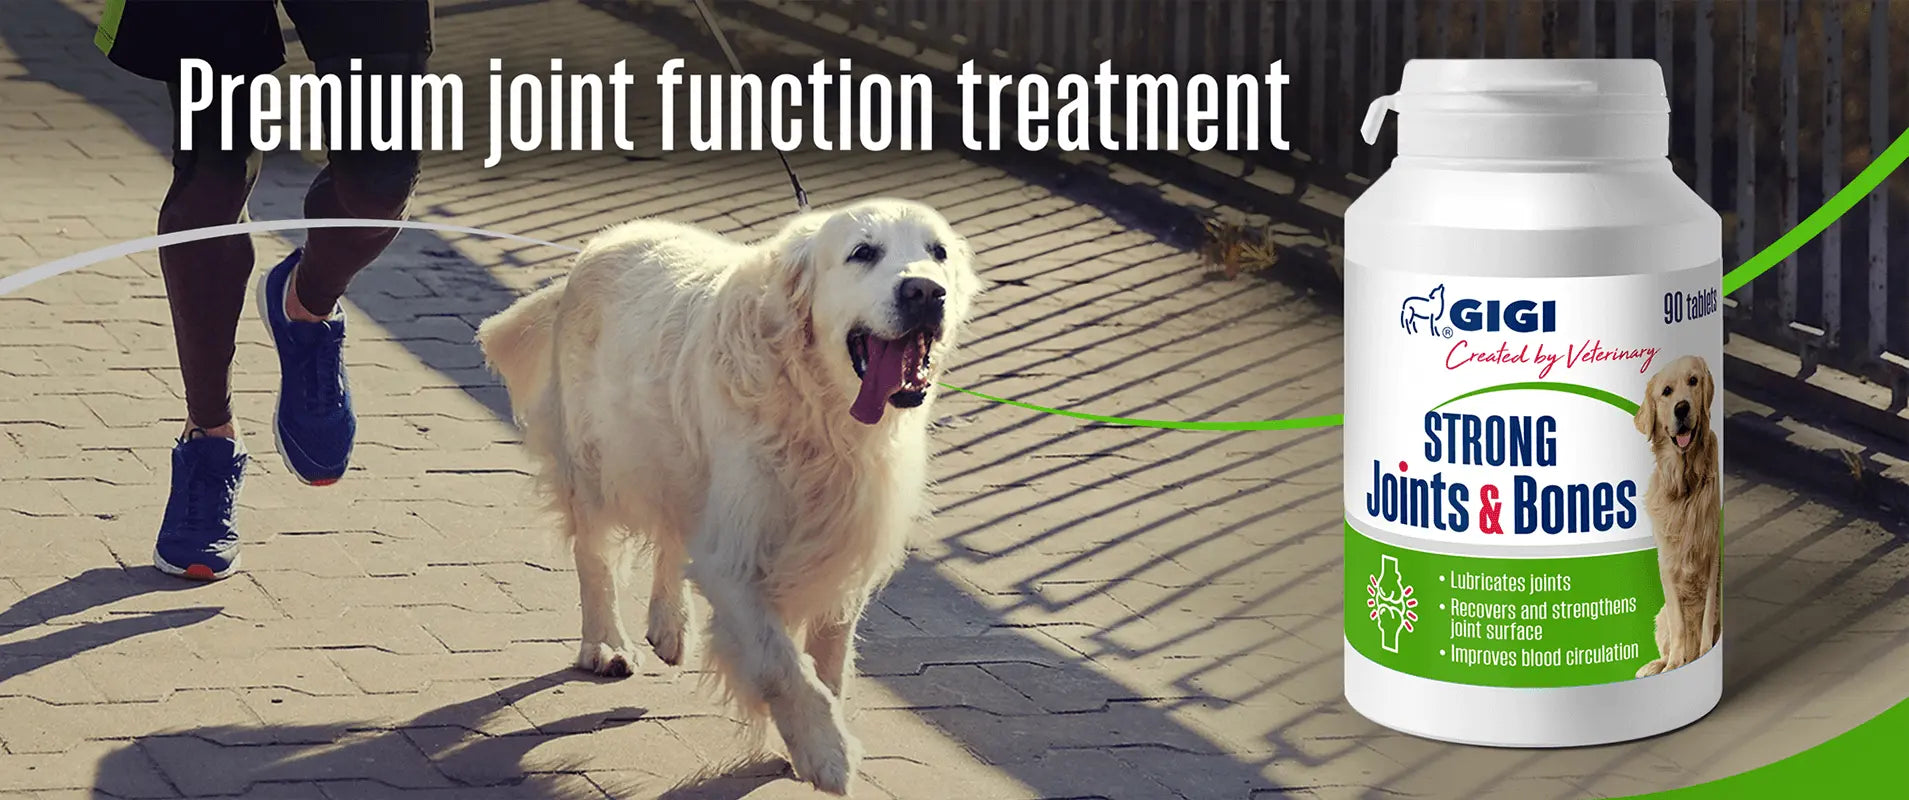 Best joint and bone supplement for dogs